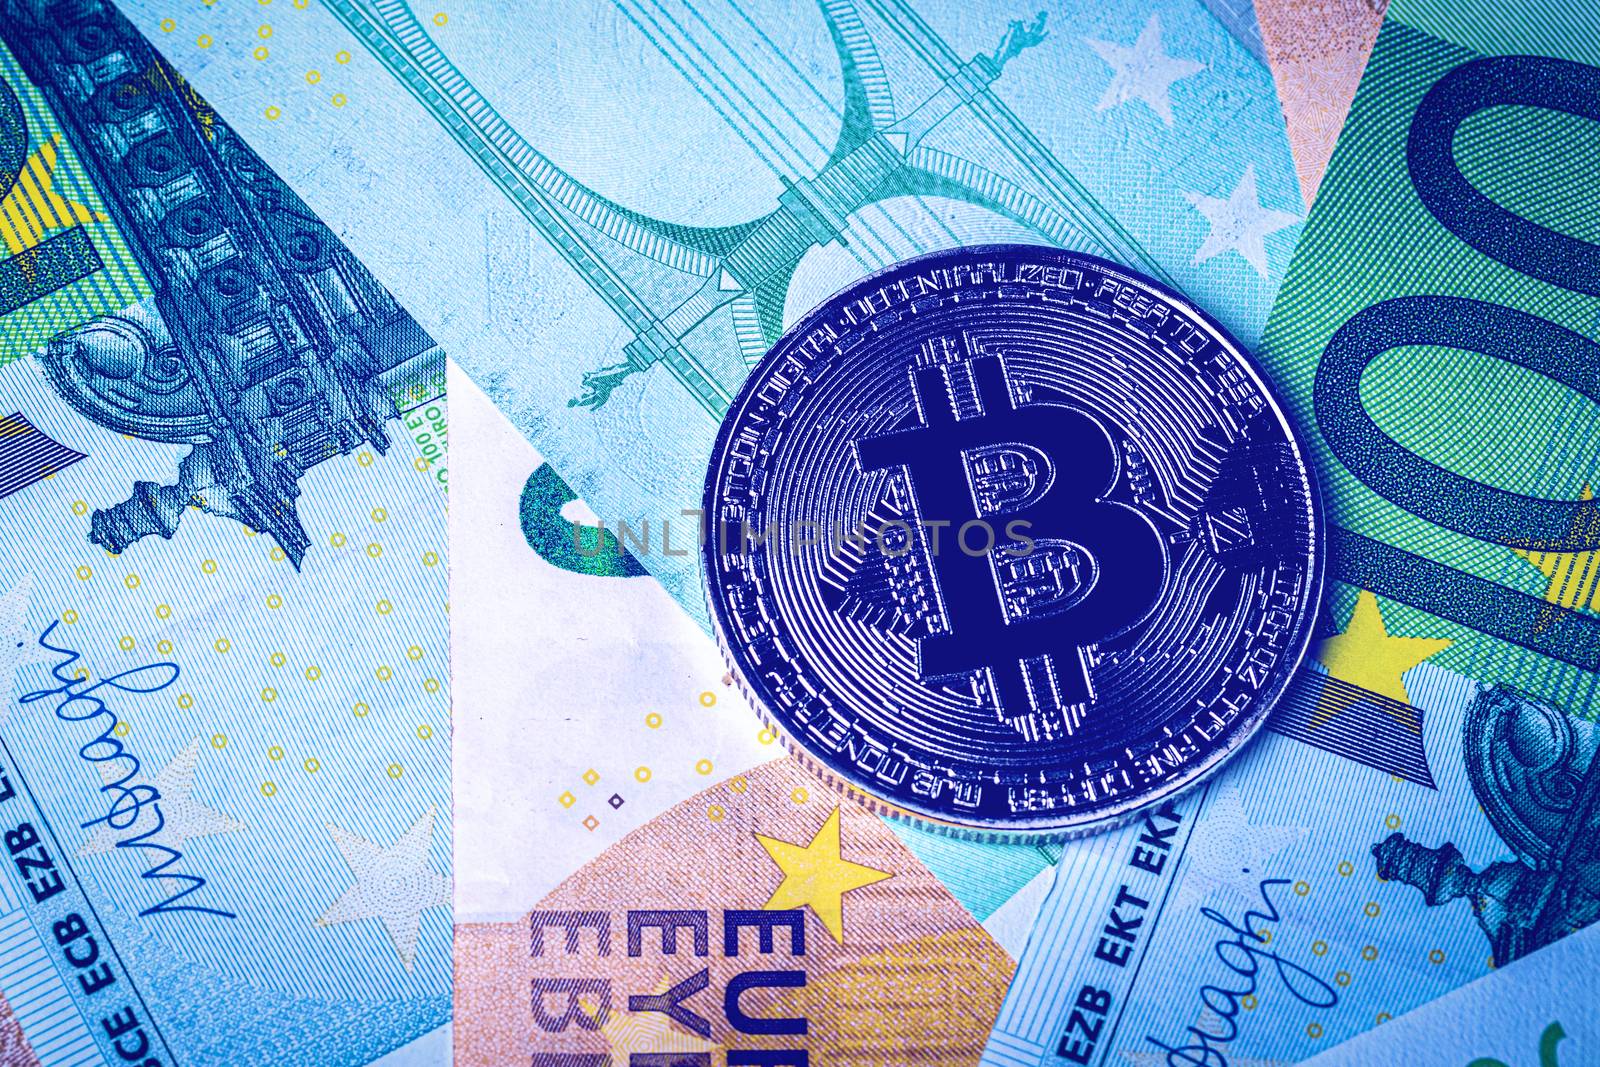 Euro bills and metal souvenir bitcoin. The concept of electronic money and commerce. Cryptocurrency and cash.